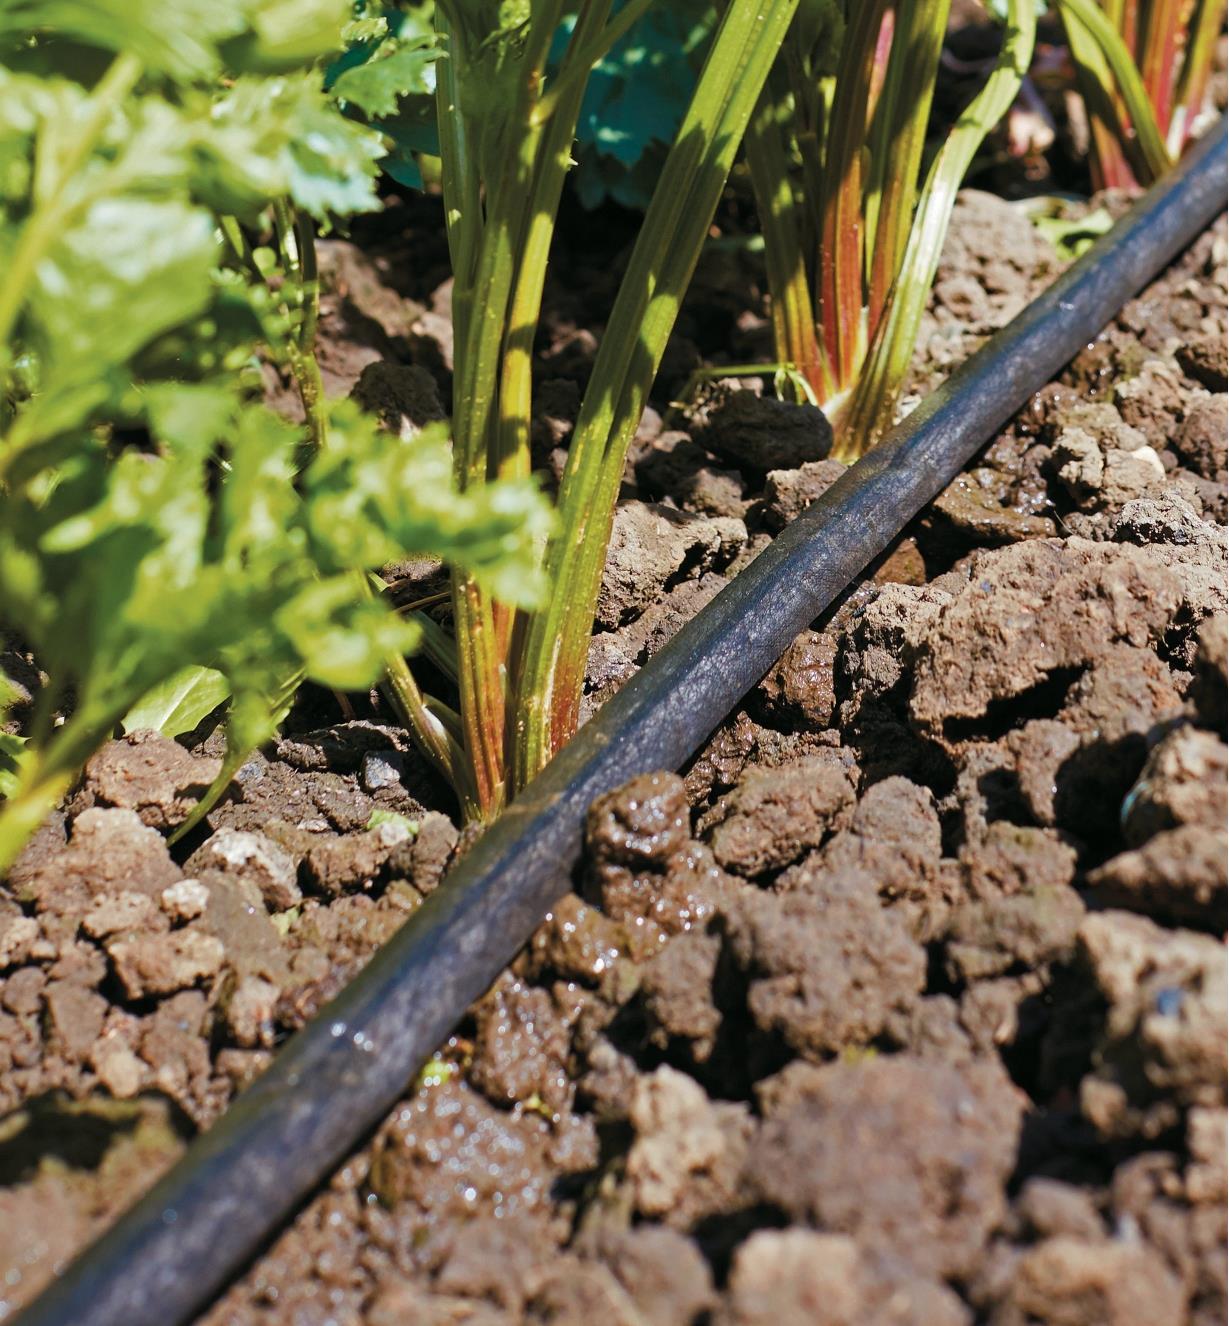 Micro-Porous Hose Kit tubing placed between plants in a garden